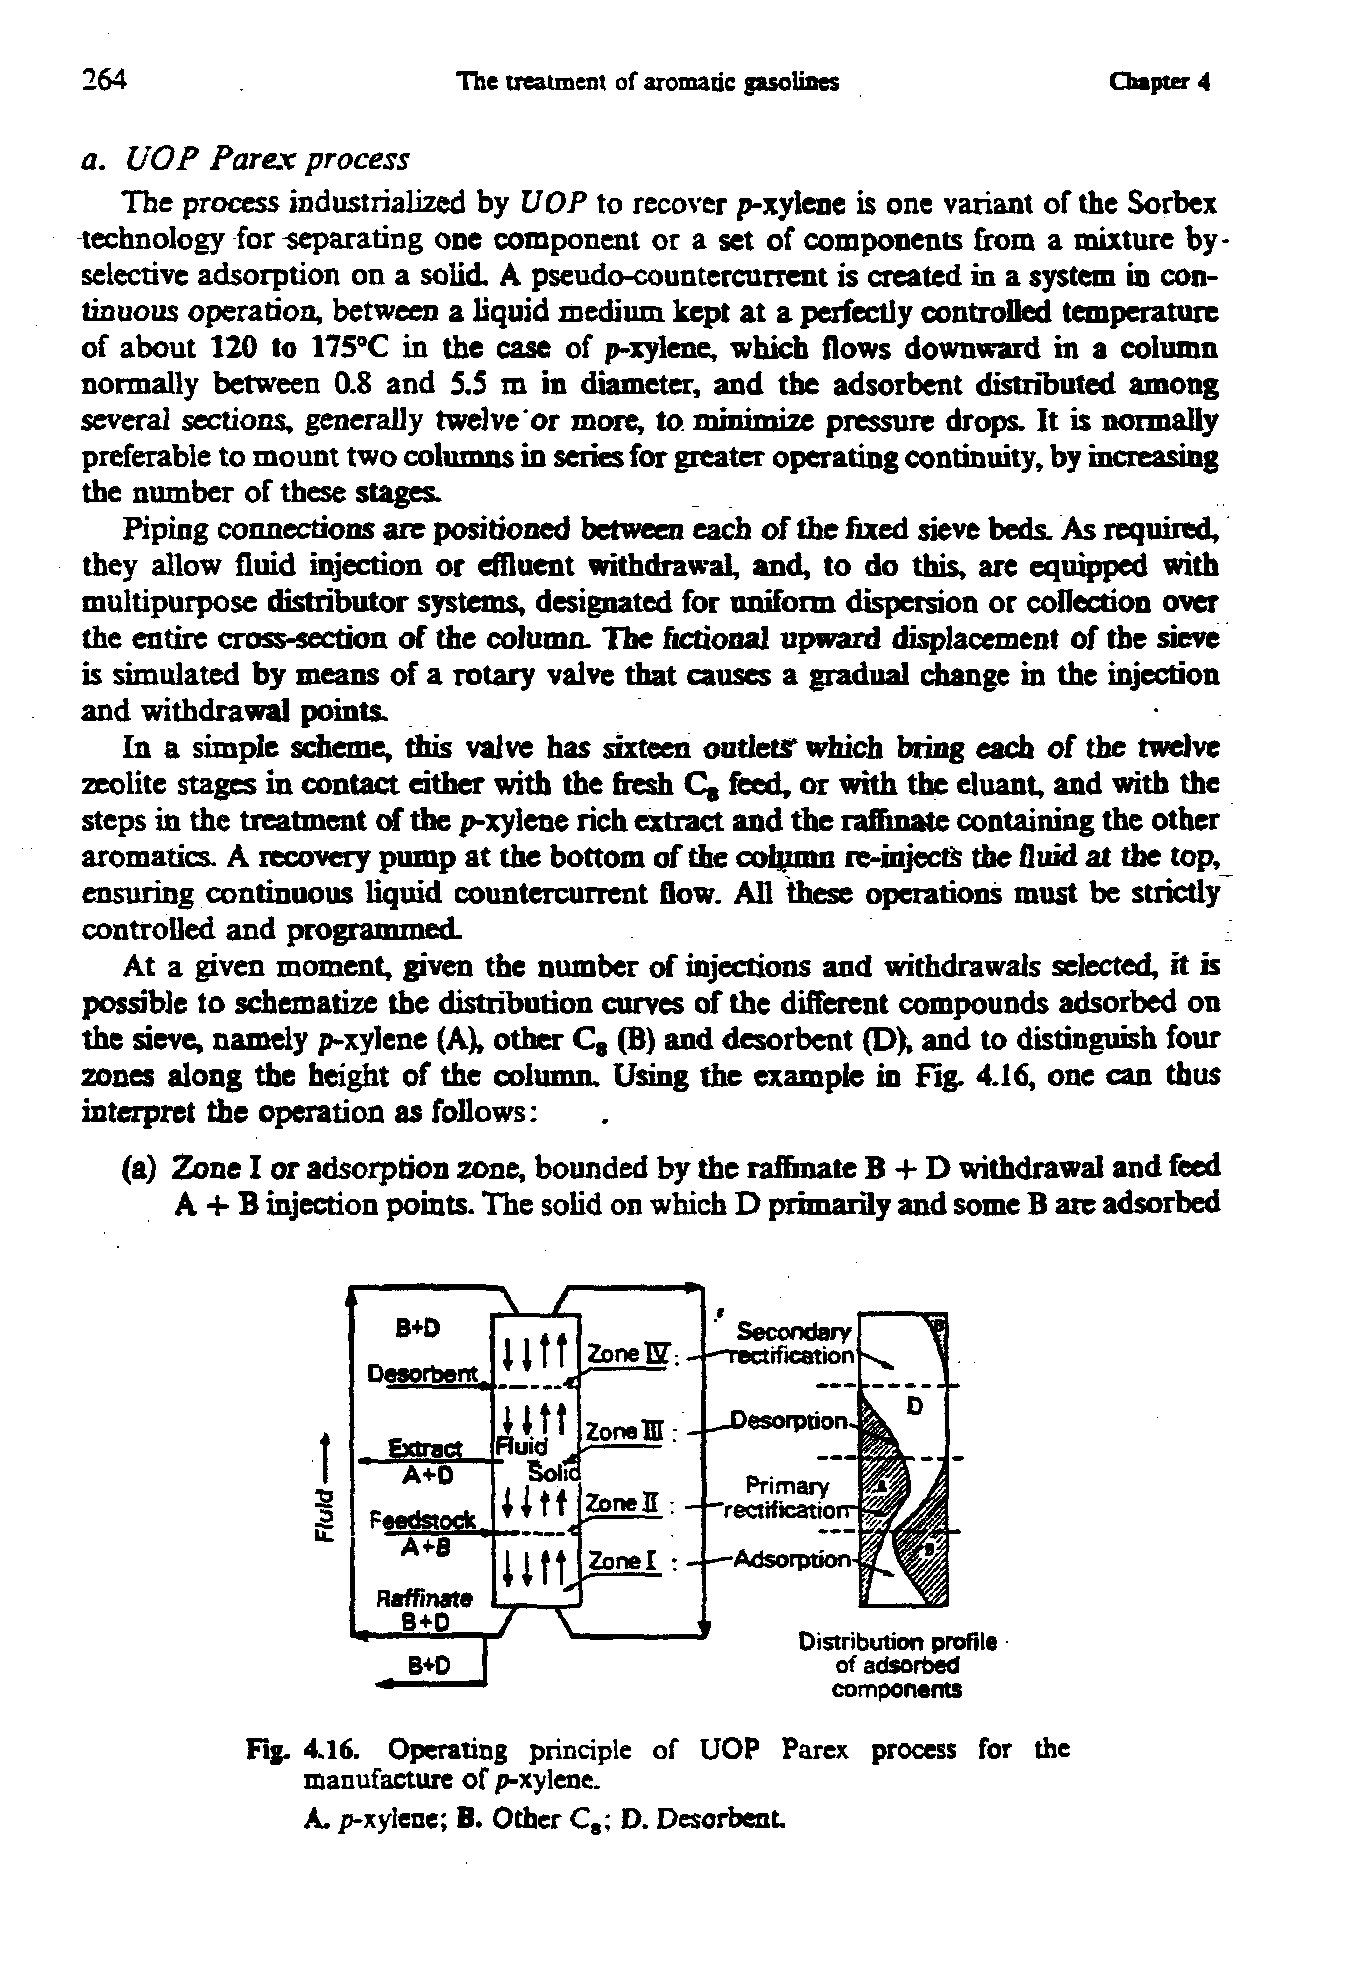 Fig. 4.16. Operating principle of UOP Parex process for the manufacture of p-xylene.